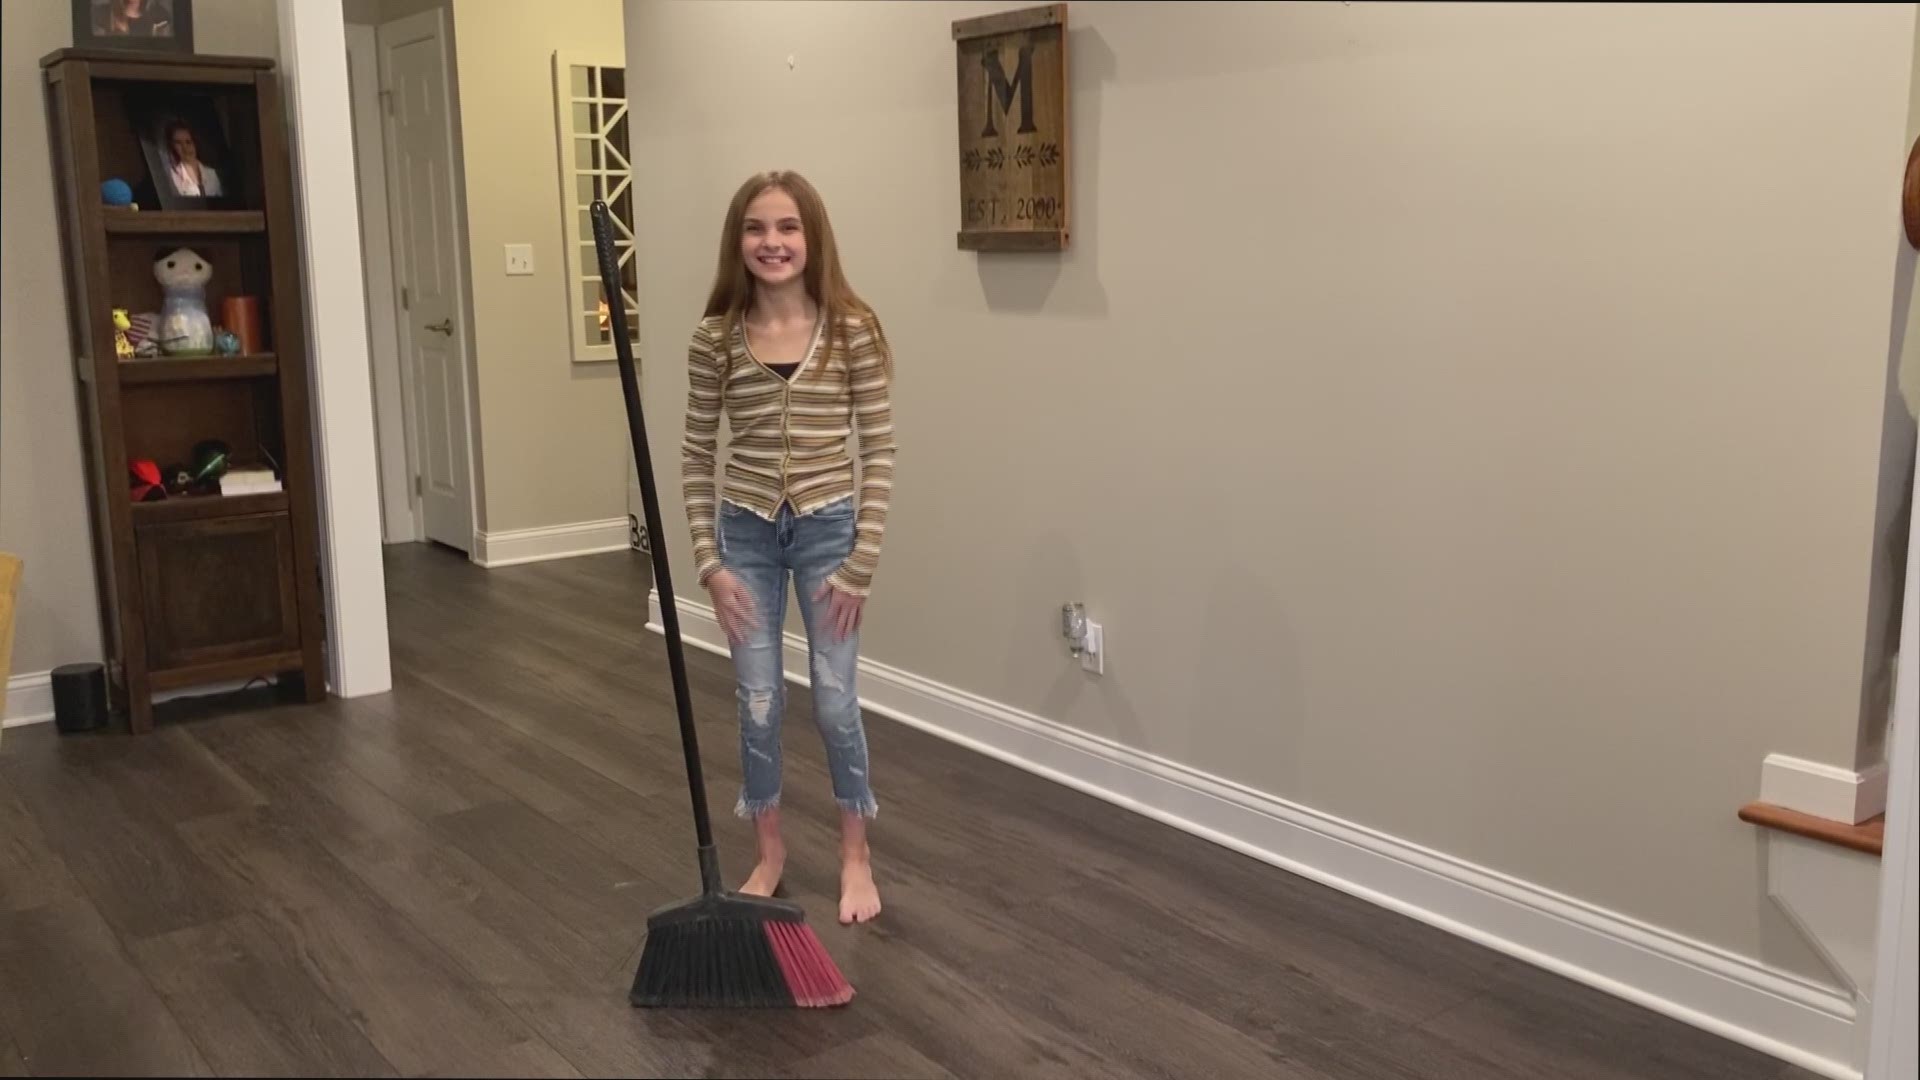 It's the latest craze that's "sweeping" the nation.